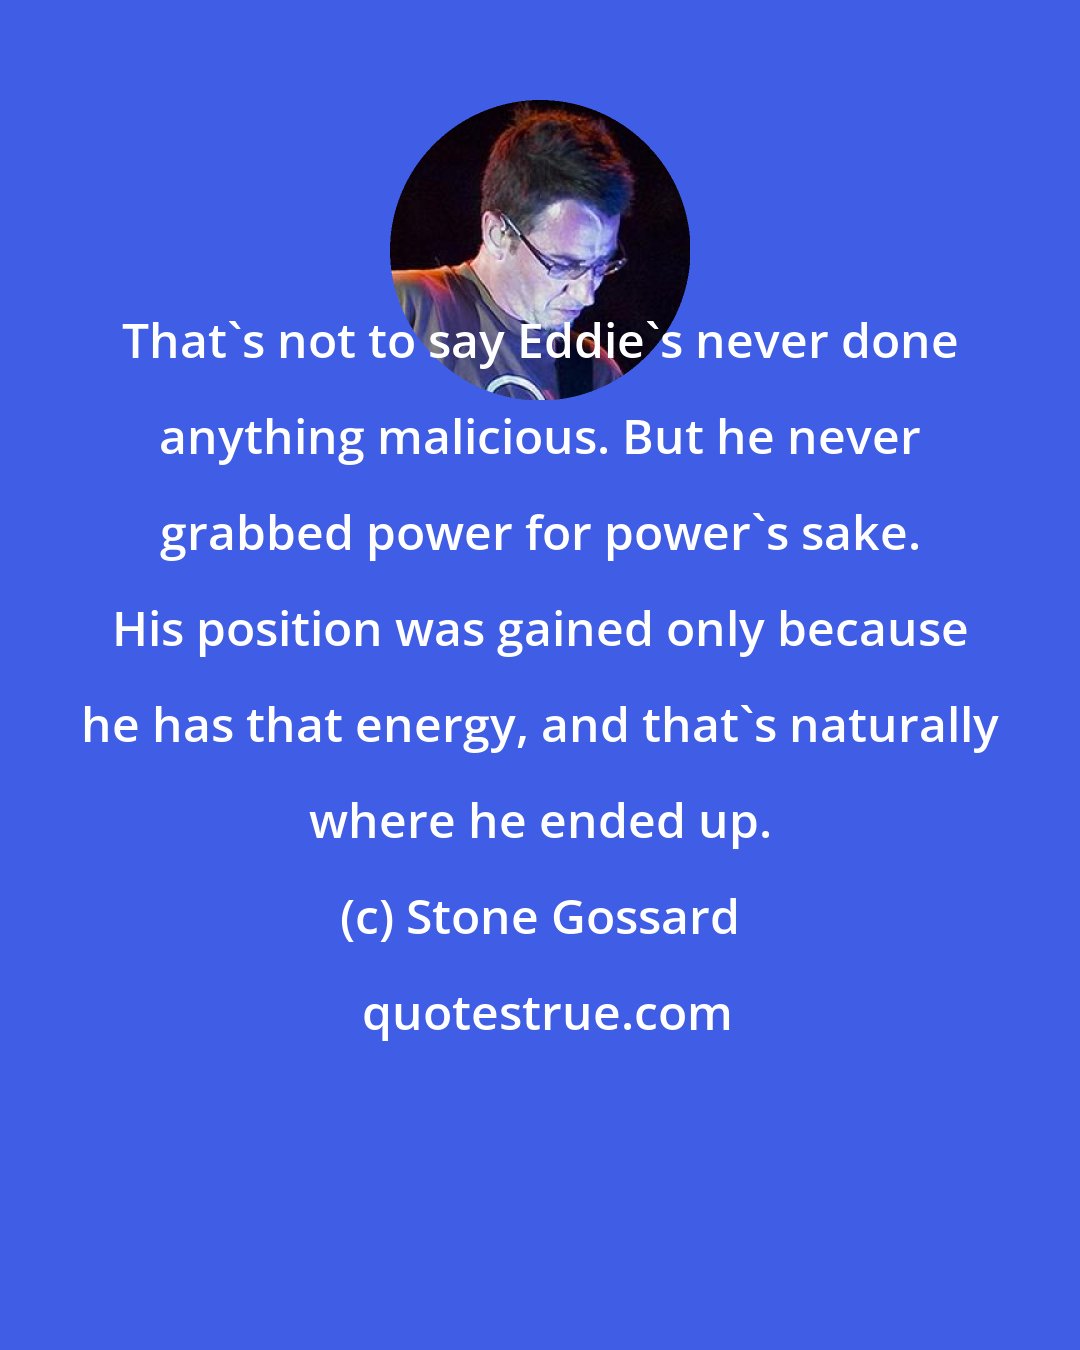 Stone Gossard: That's not to say Eddie's never done anything malicious. But he never grabbed power for power's sake. His position was gained only because he has that energy, and that's naturally where he ended up.